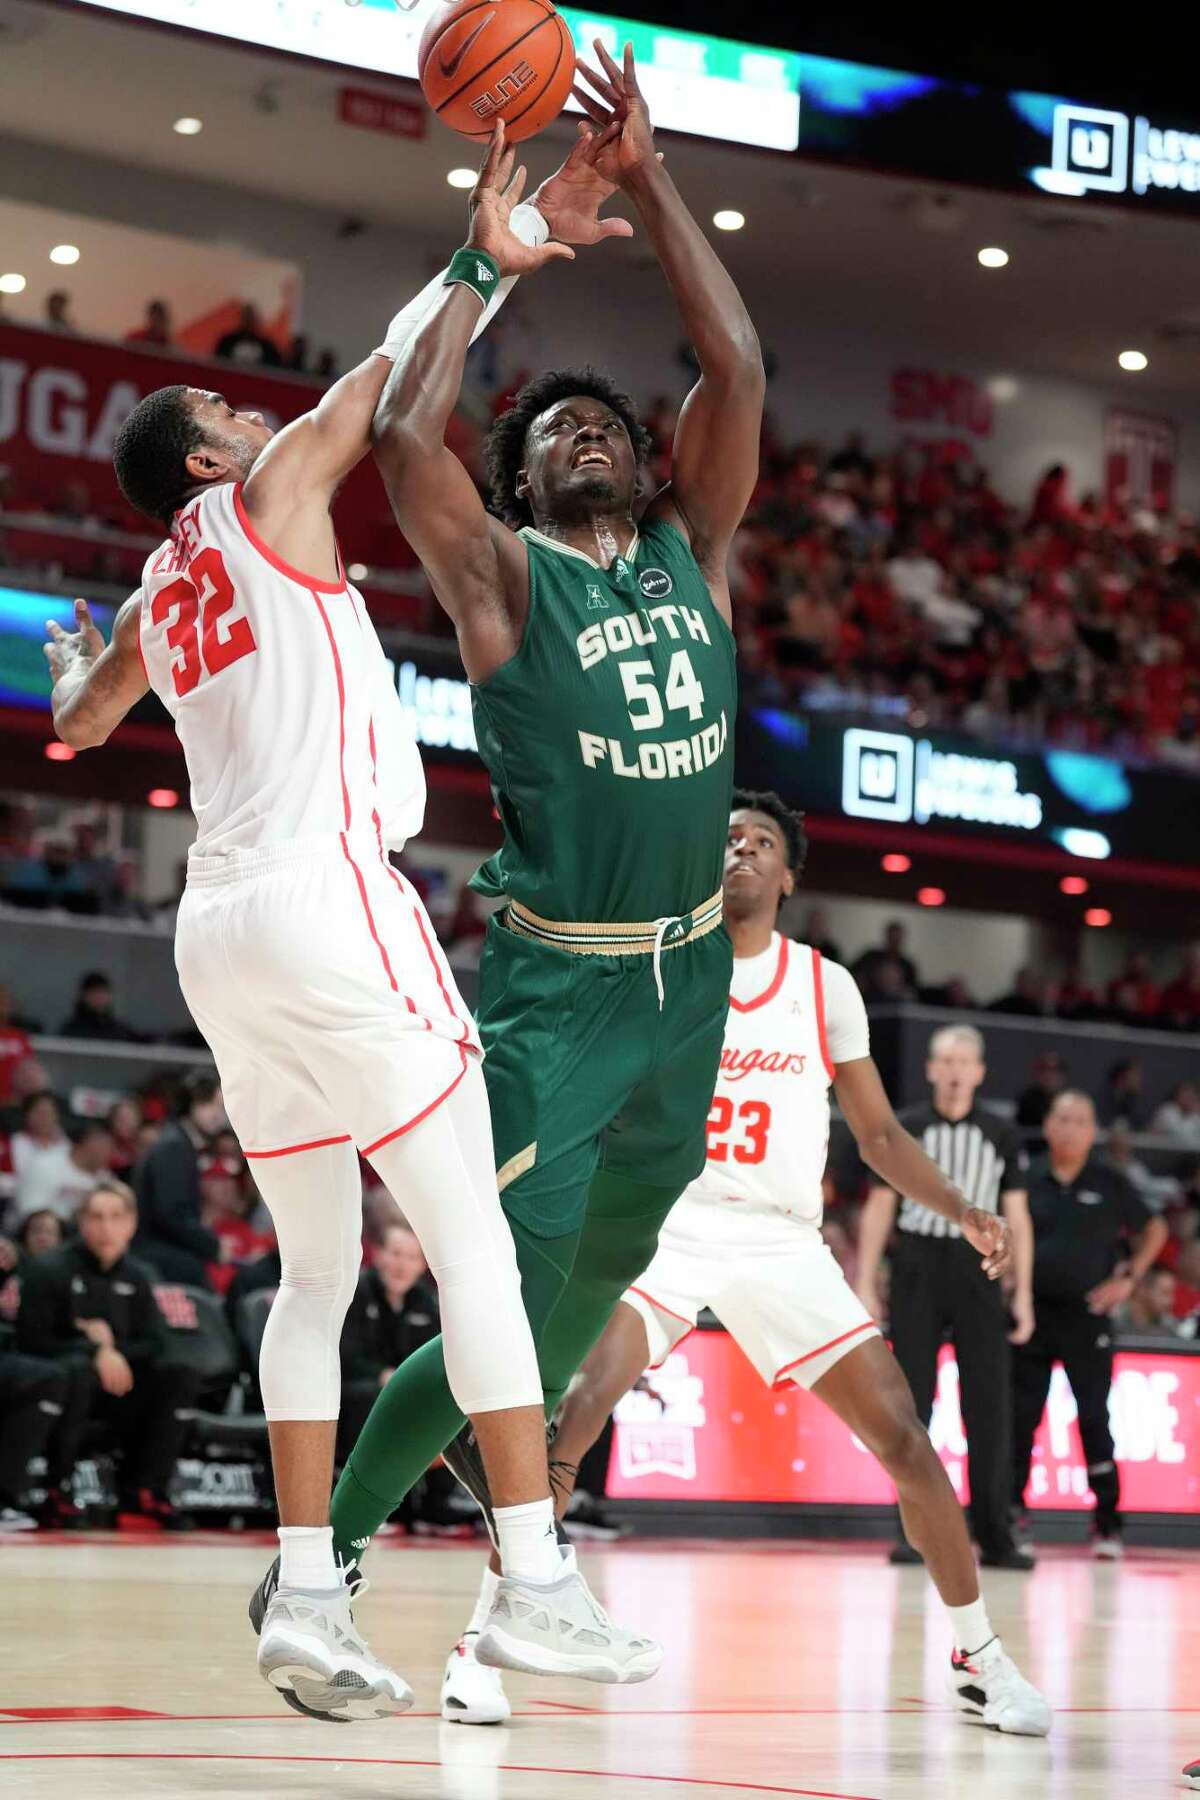 South Florida Bulls center Russel Tchewa (54) goes to he basket against Houston Cougars forward Reggie Chaney (32) during the first half of a NCAA mens basketball game at the Fertitta Center on Wednesday, Jan. 11, 2023 in Houston.